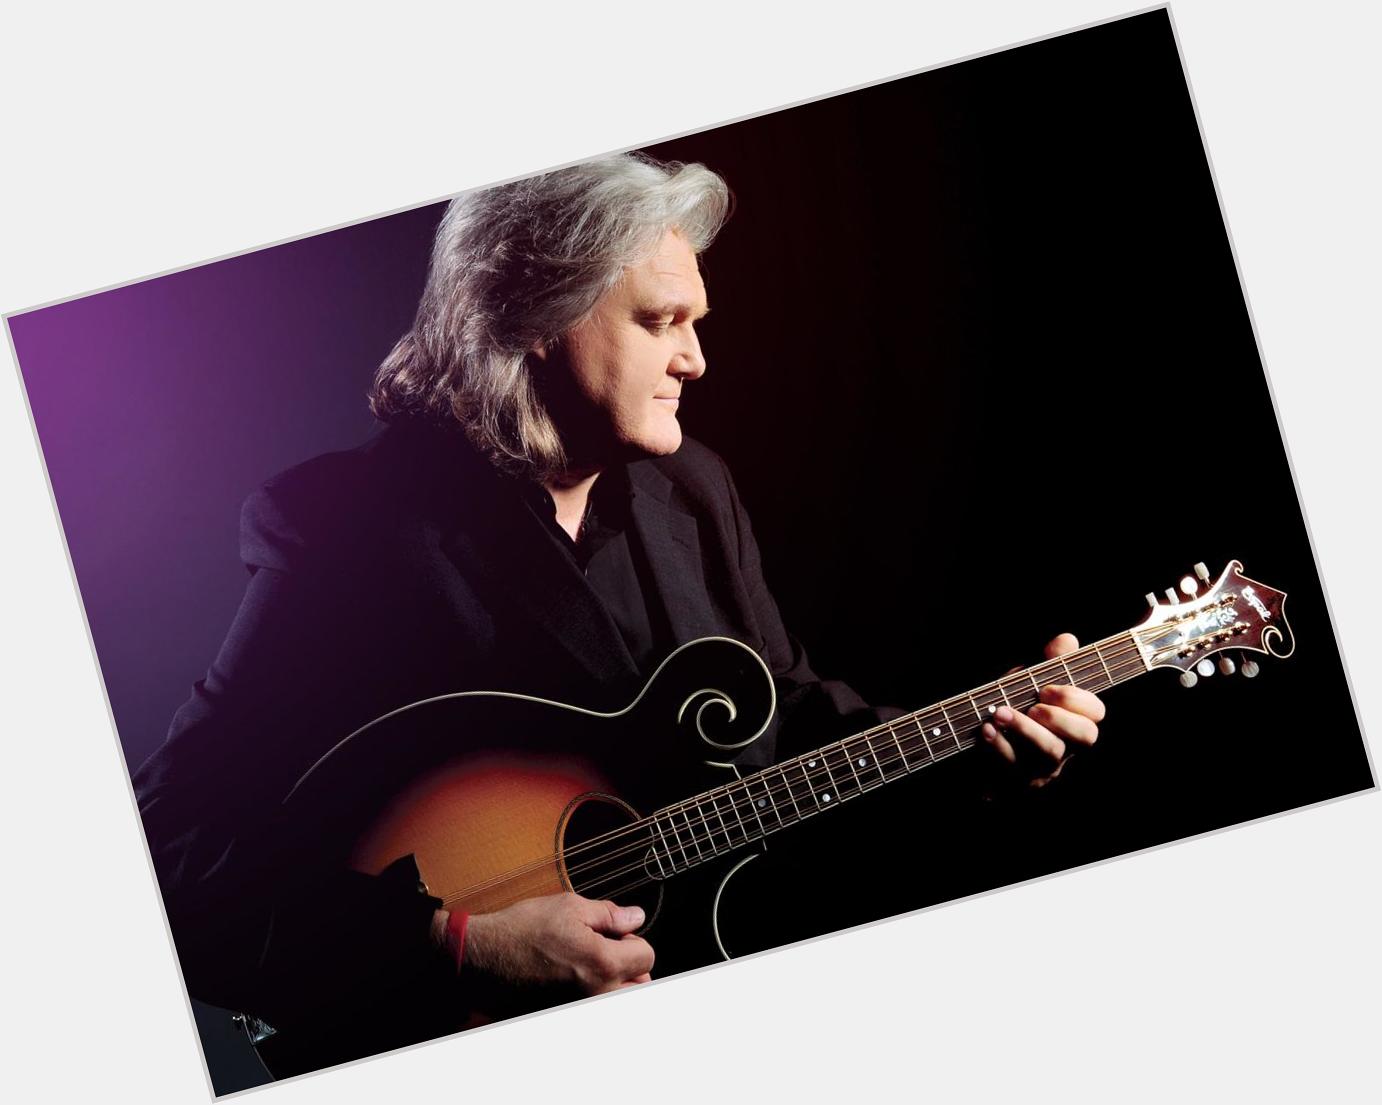 Happy Birthday to Ricky Skaggs!
We hope to see you again soon. 